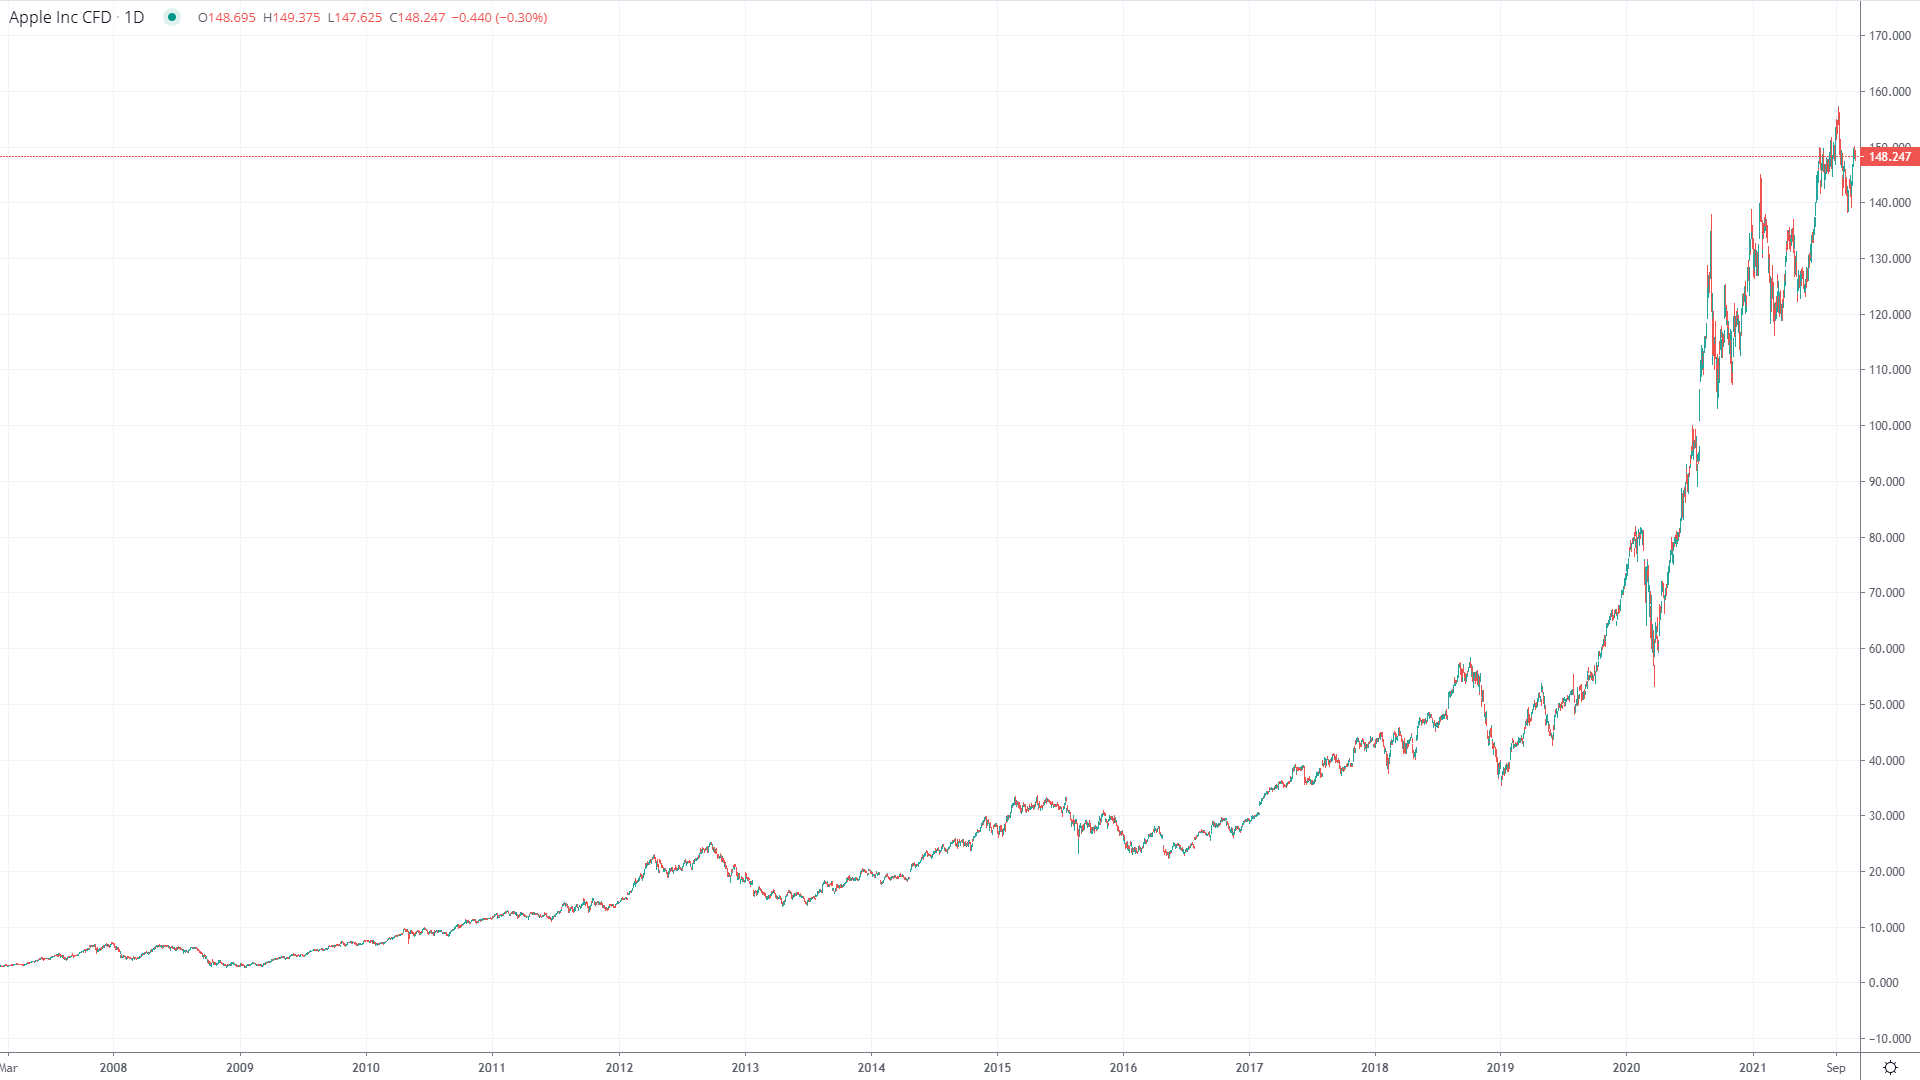 Apple stock price from 2007 to 2021